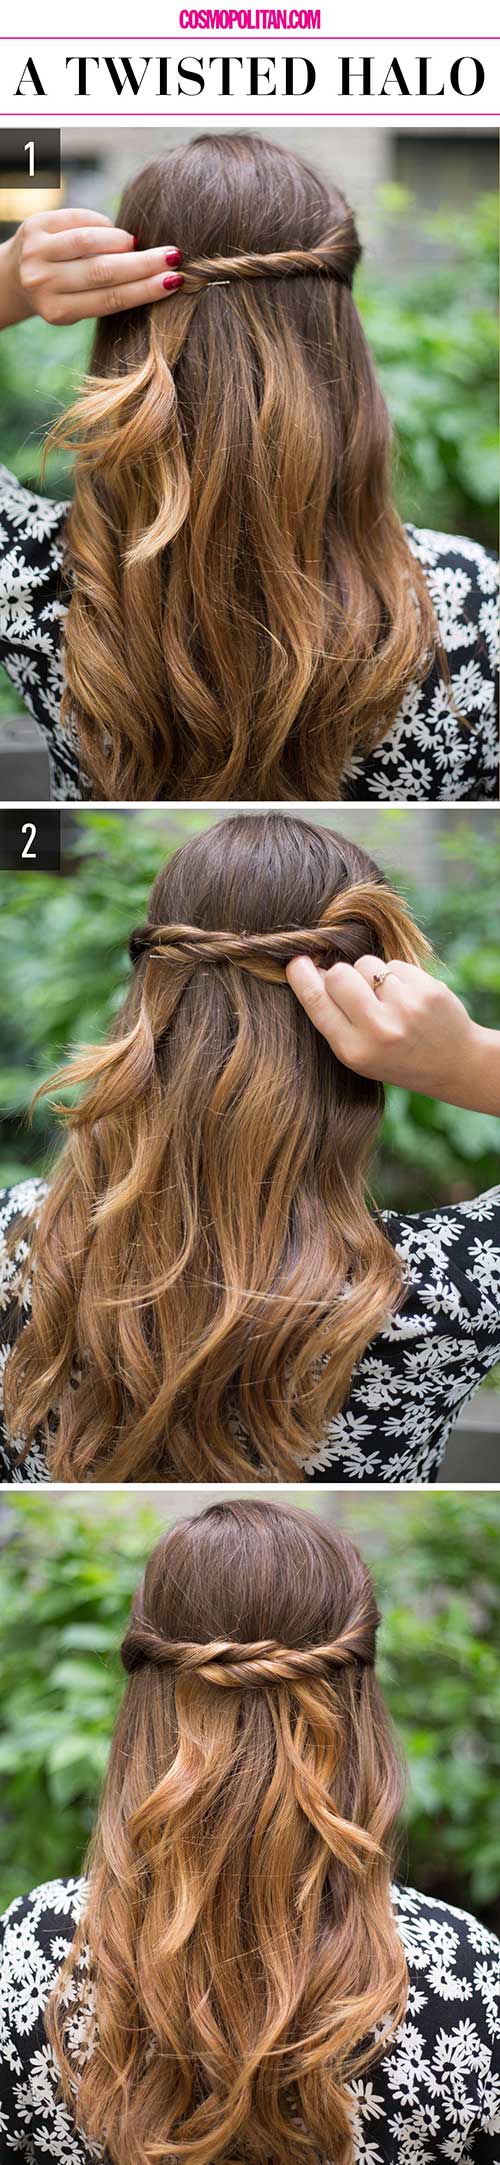 Twisted halo hairstyle tutorial for girls with long hair